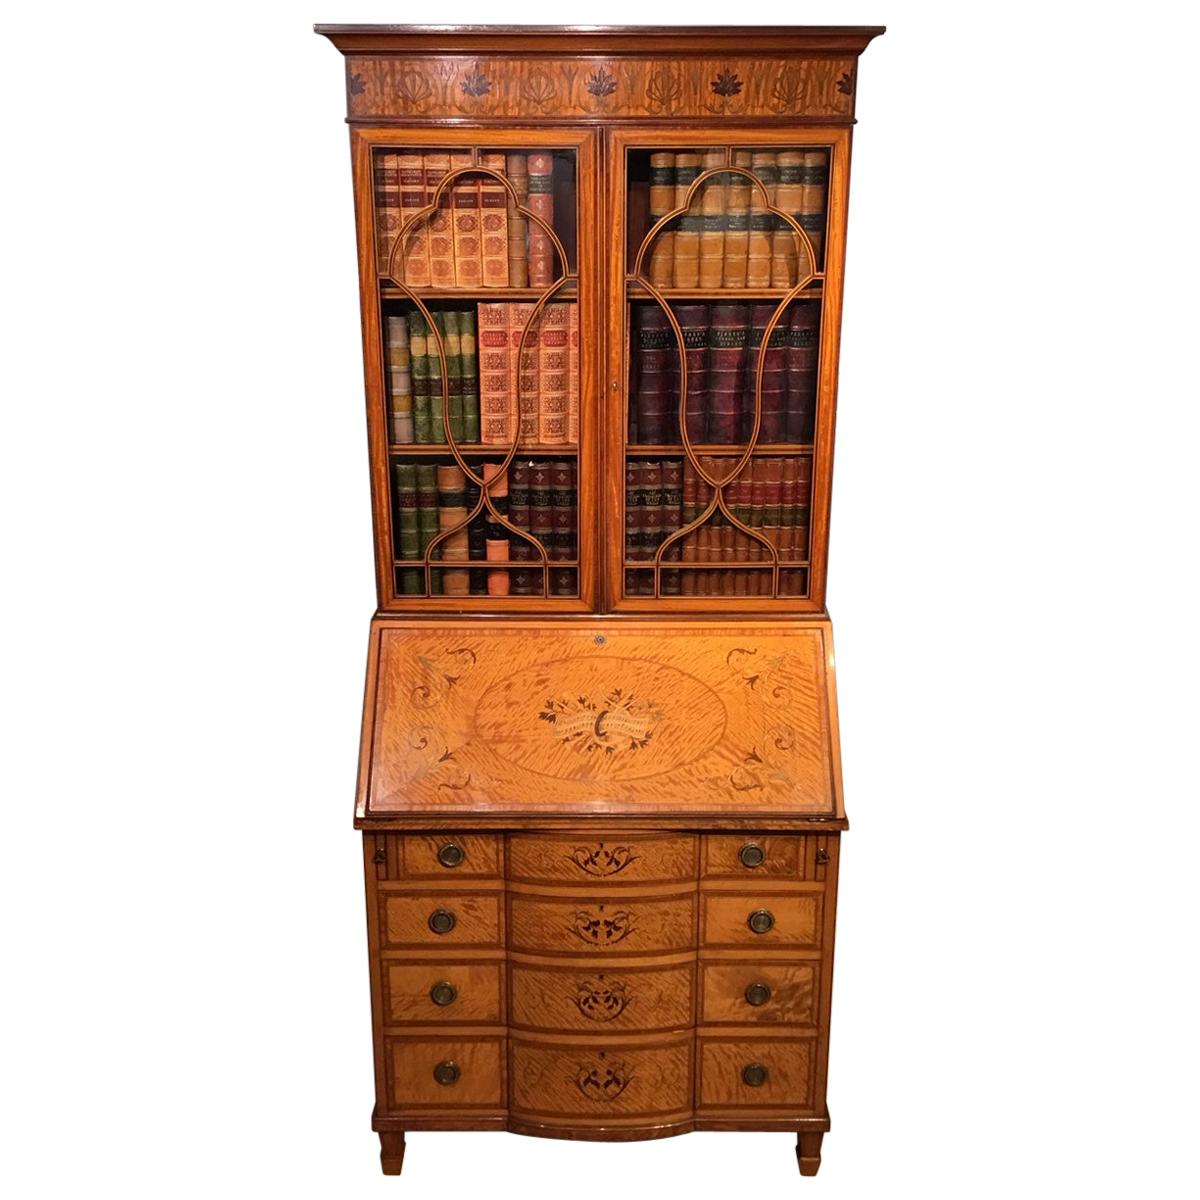 Sheraton Revival Satinwood Marquetry Inlaid Antique Bureau Bookcase For Sale